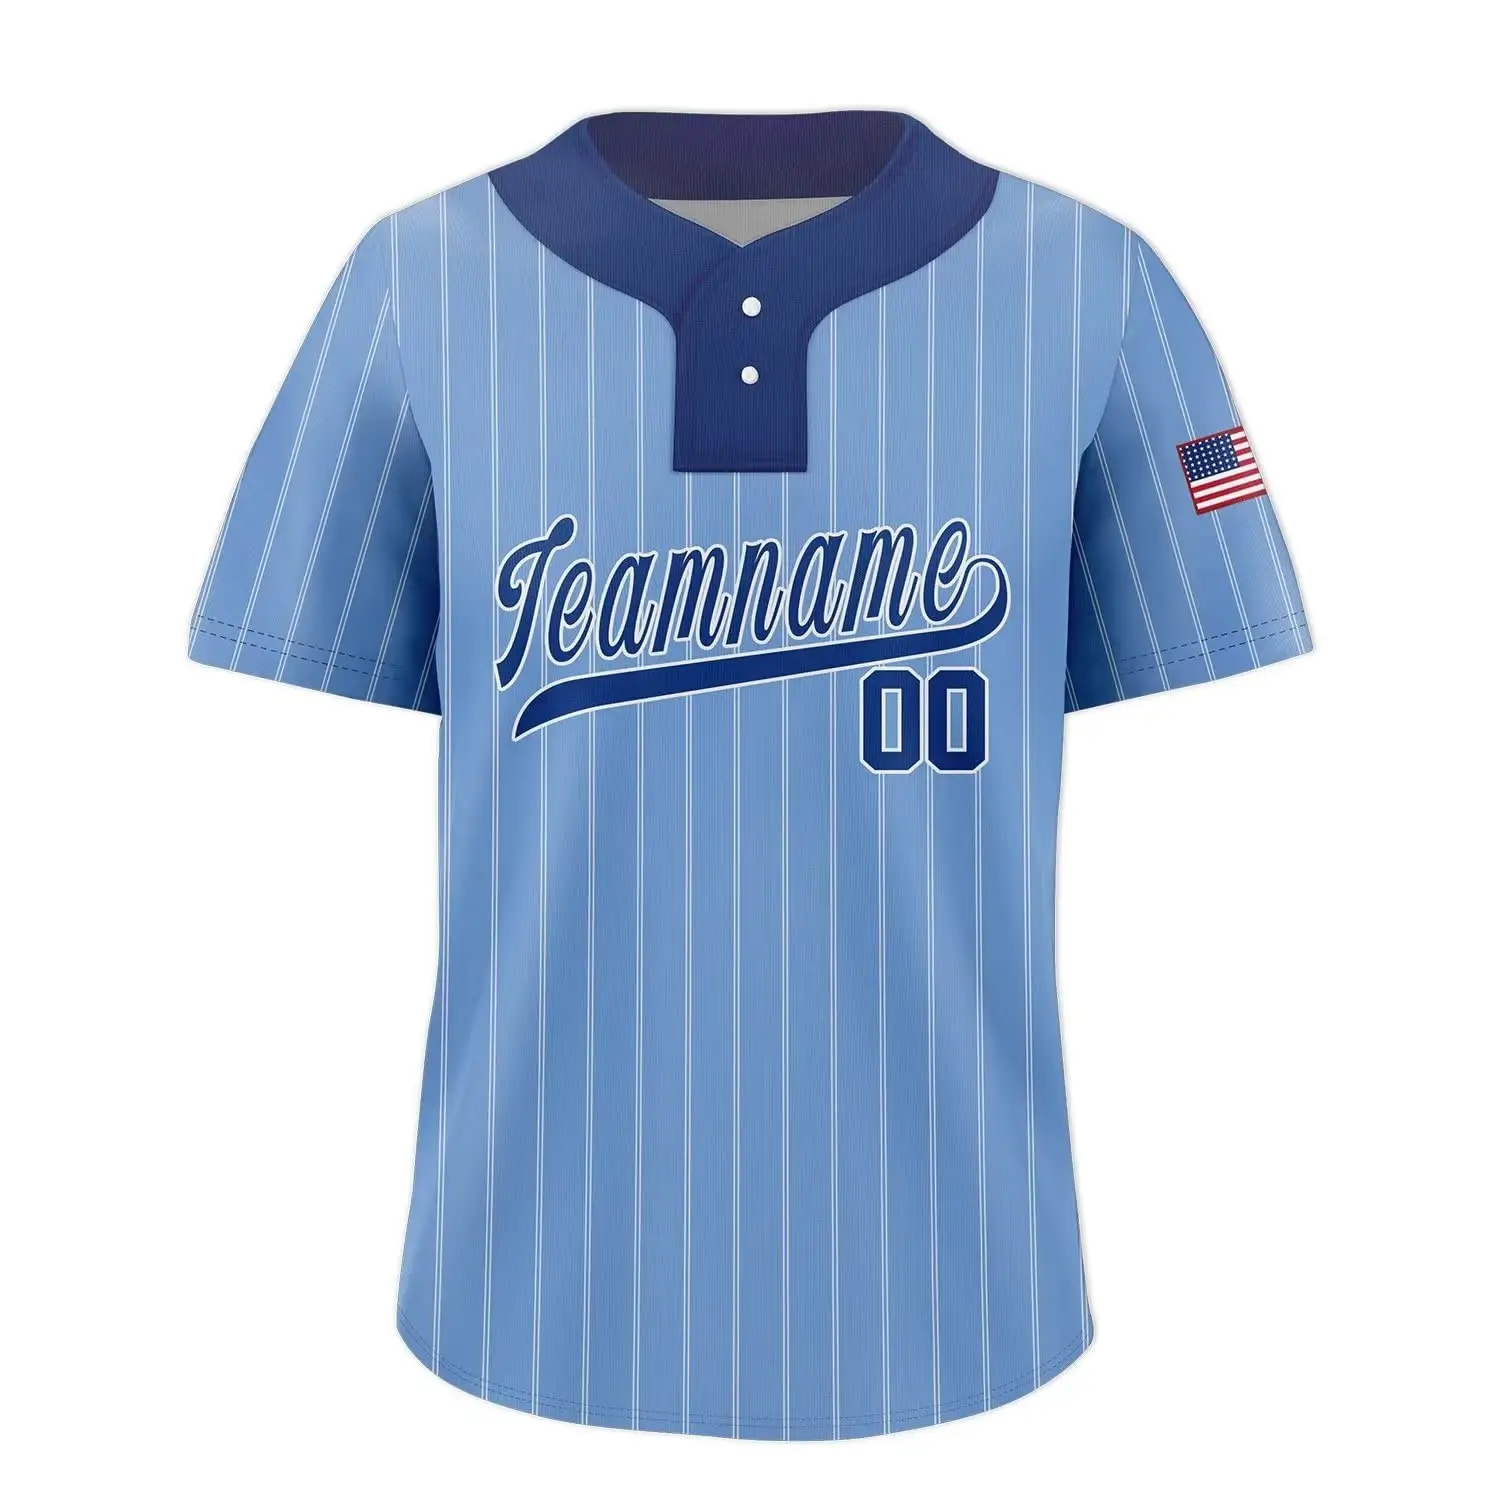 Sublimation Print Team Name and Number Quick-Dry sportswear Men Women Kids Personalized Custom Baseball Jersey Shirts